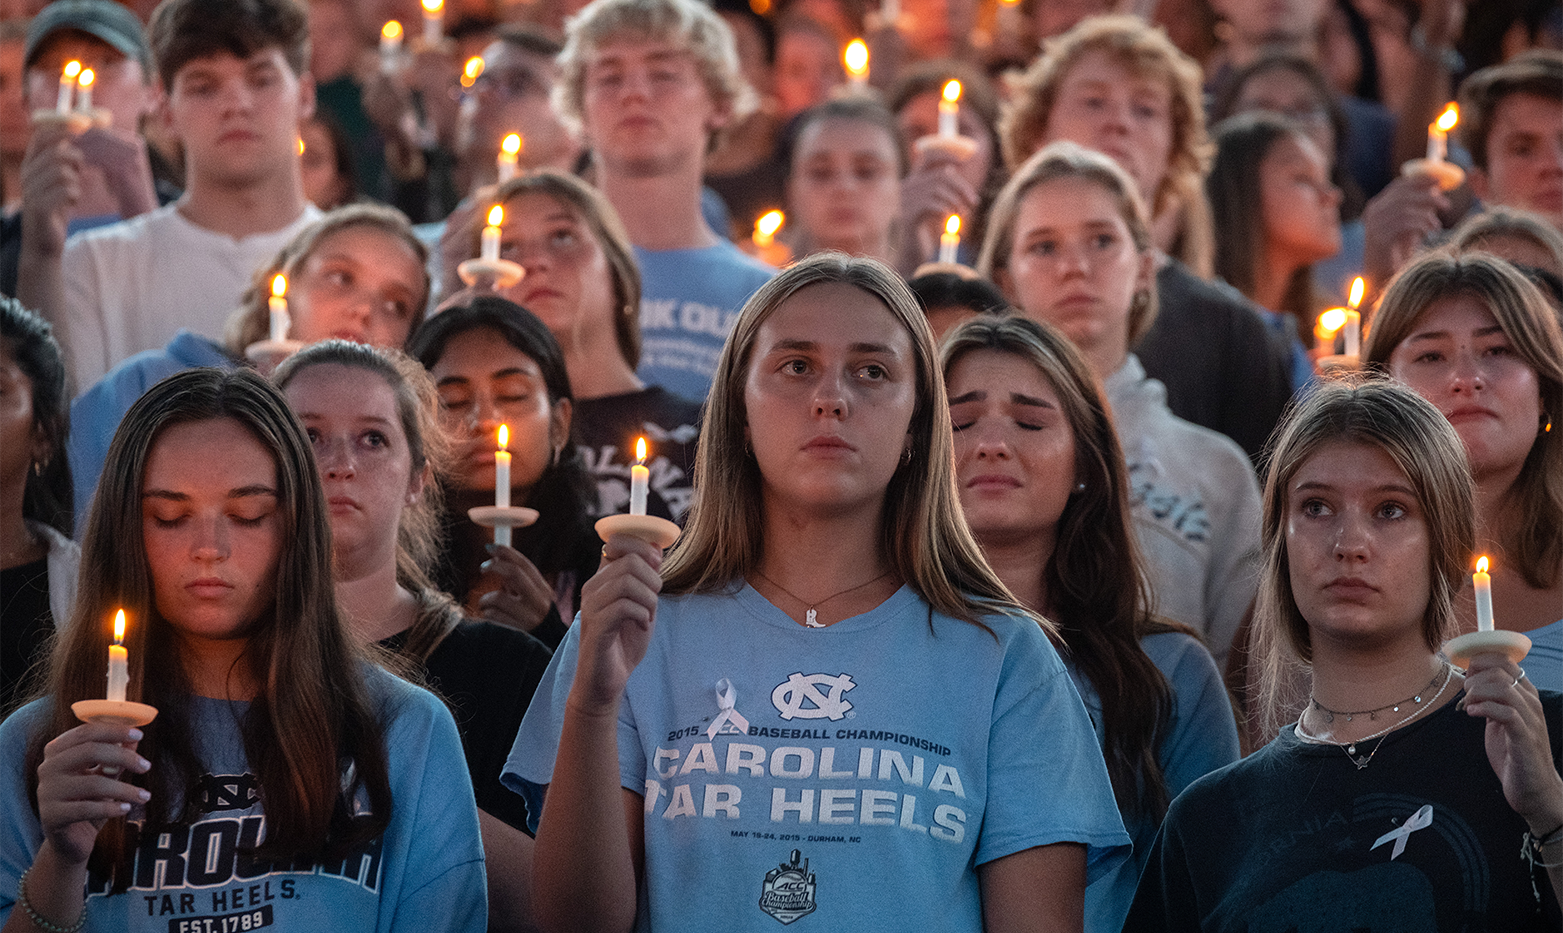 A crowd of people holding candles in an arena at a vigil.